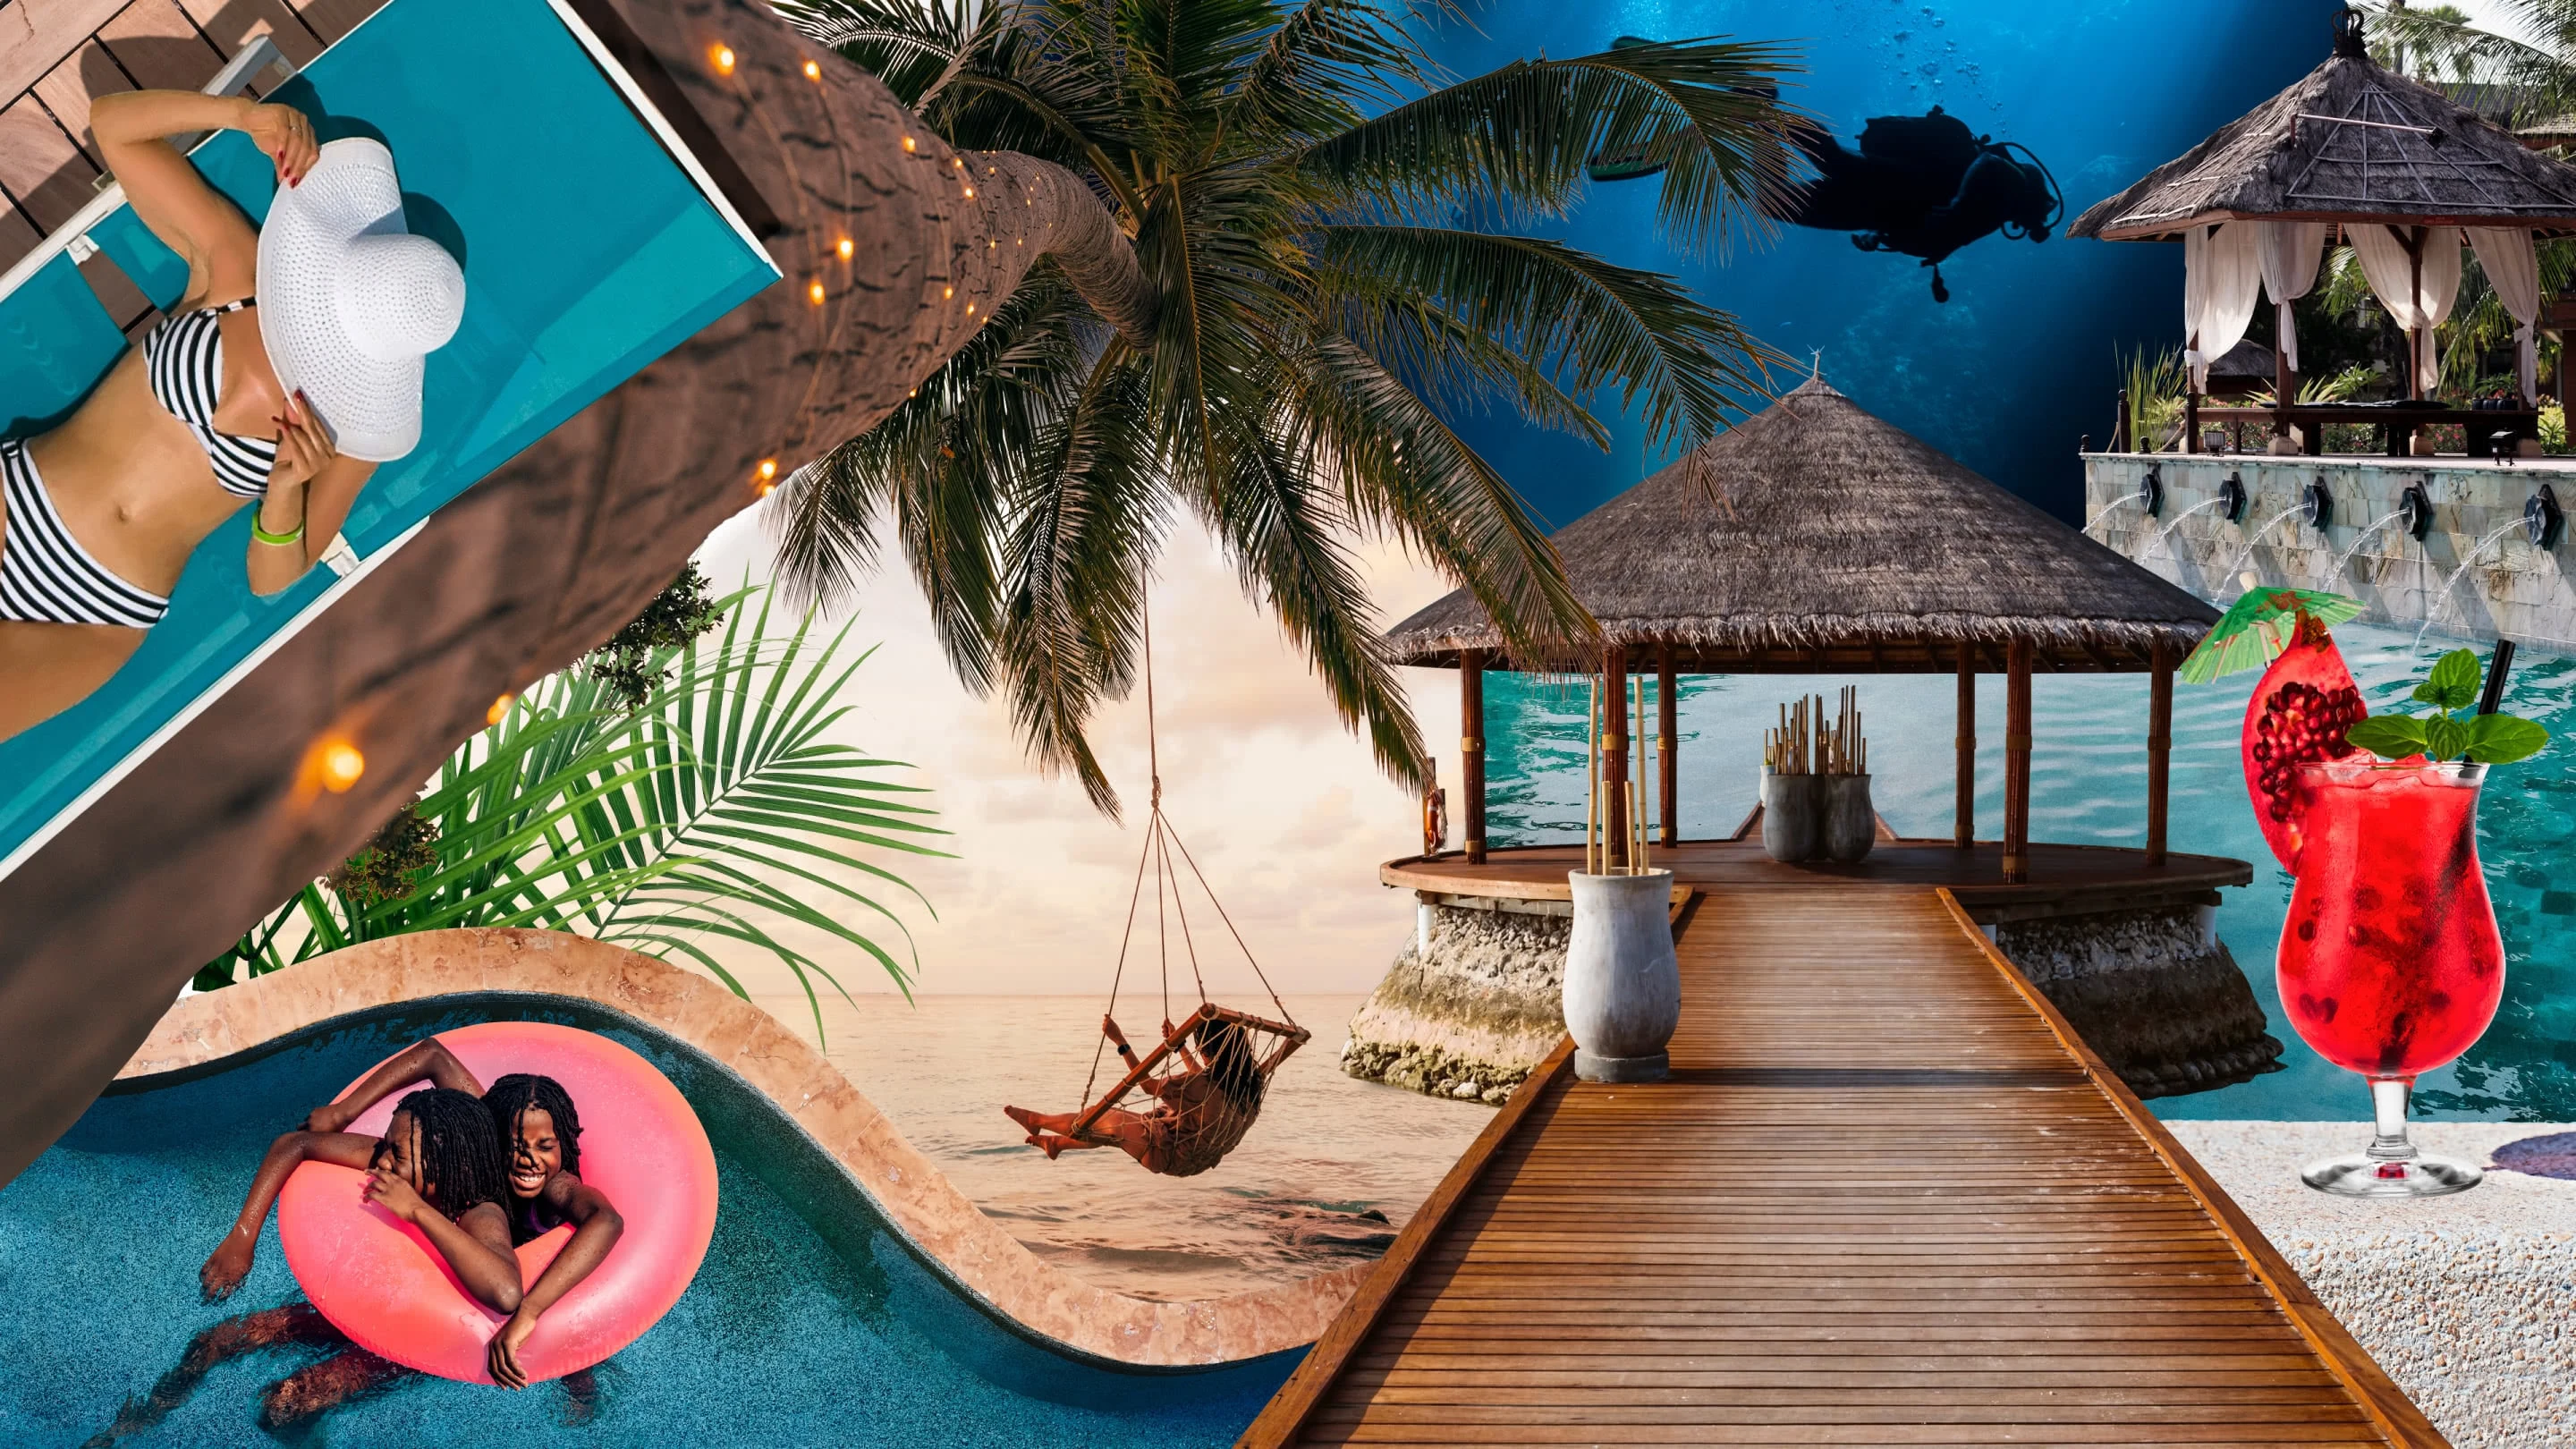 Collage of vacation spots. Top left, a white woman in a bikini sunbathing. Bottom left, two Black kids on a pink floatie. At center, woman swinging on a macrame swing in the distance. A bohio. Top right, a scuba diver. Bottom right, a pomegranate cocktail.